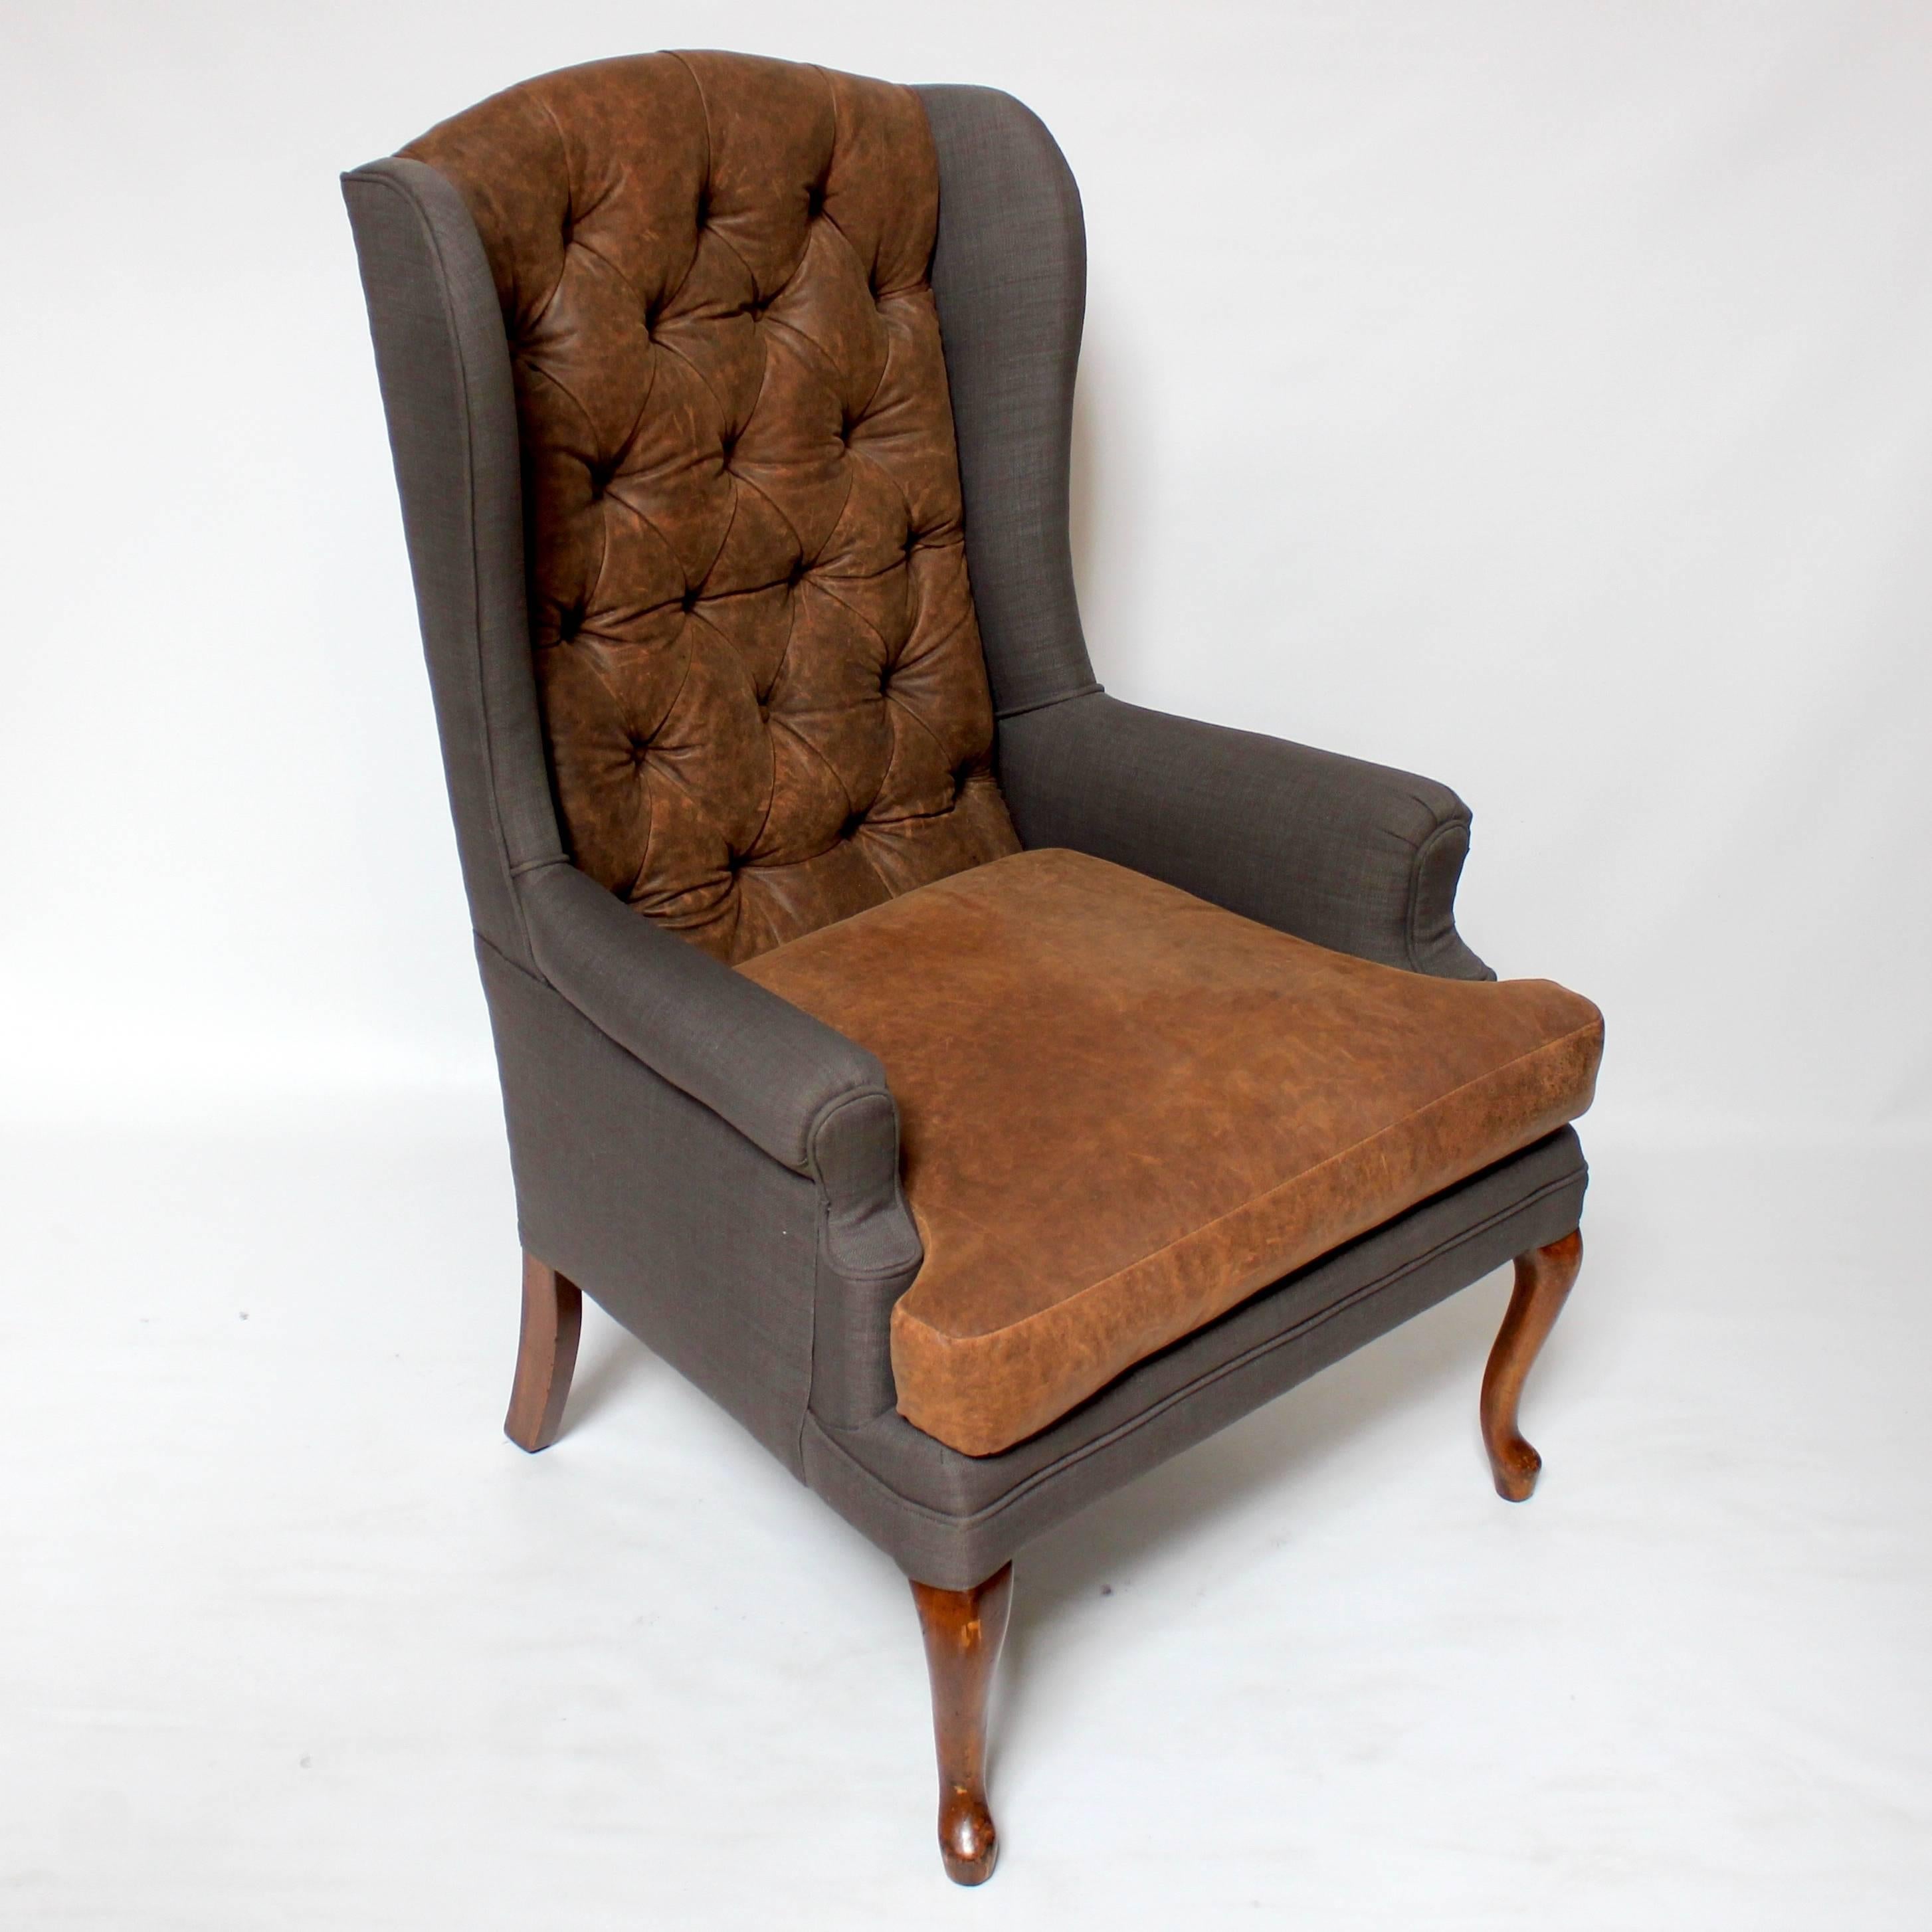 Pair of Mid-Century vintage wingback chairs, professionally reupholstered in custom Napa leather and grey fabric. The frames are American hardwood, and the tufted backs give the chairs the feel of a Classic Chesterfield, while the contrasting grey